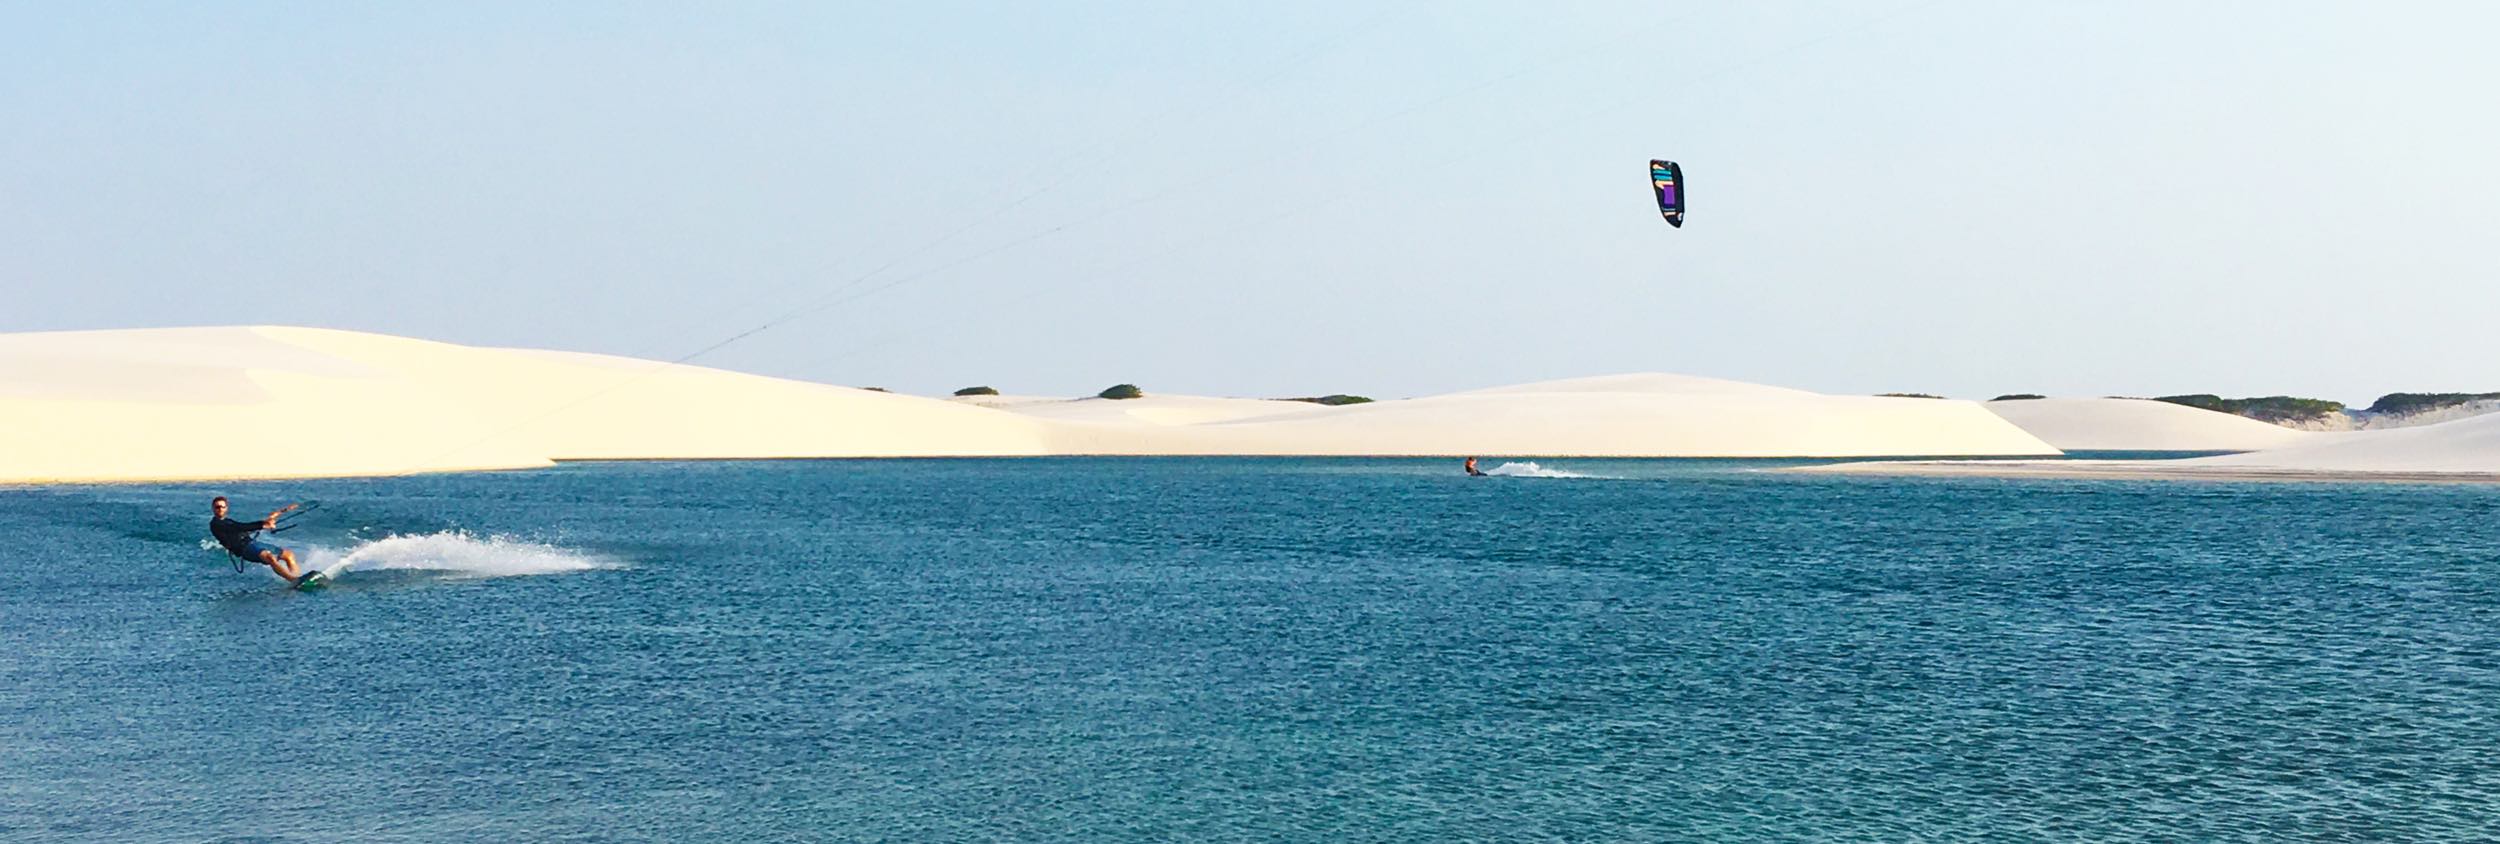 Kiting in the dunes